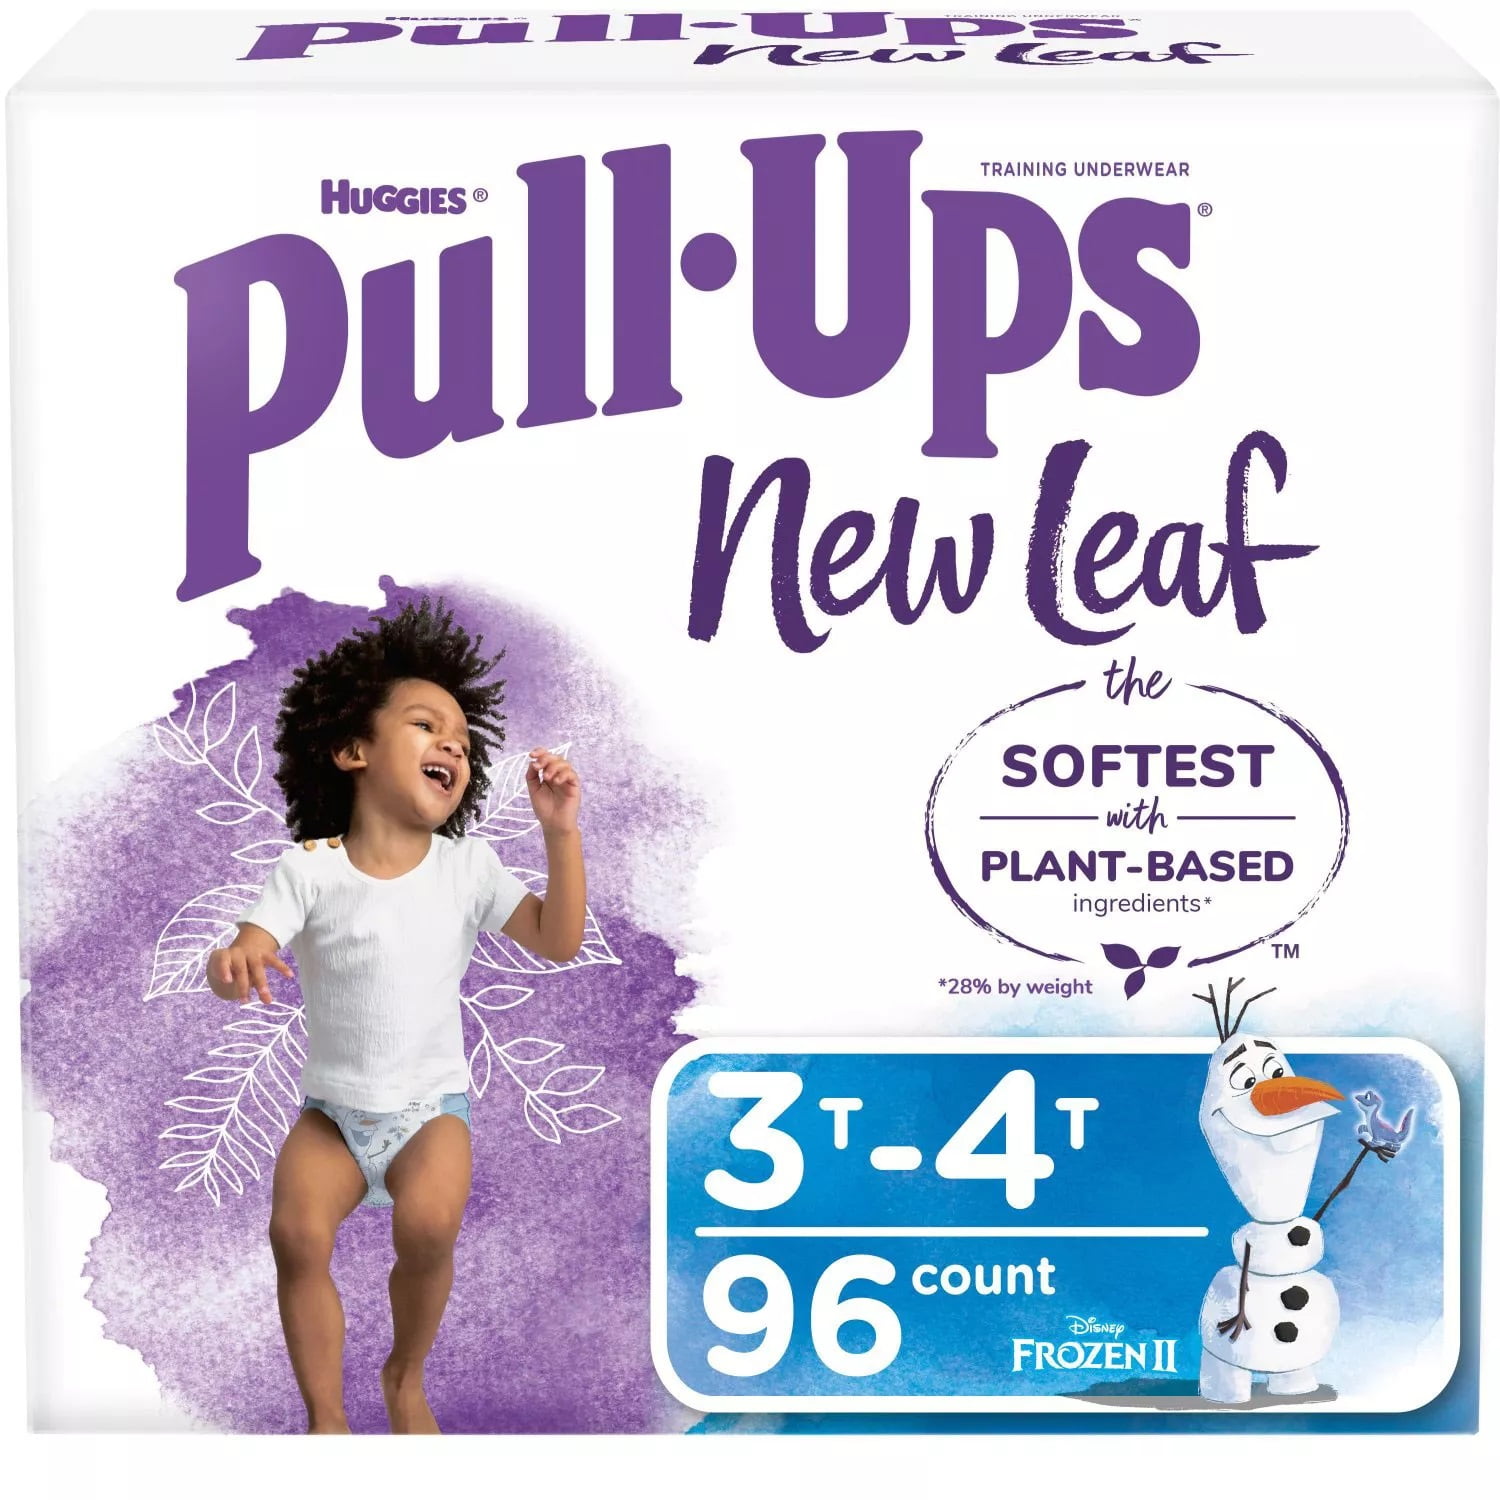 Pampers Easy Ups Training Underwear Boys, Size 7 5T-6T, 80 Count